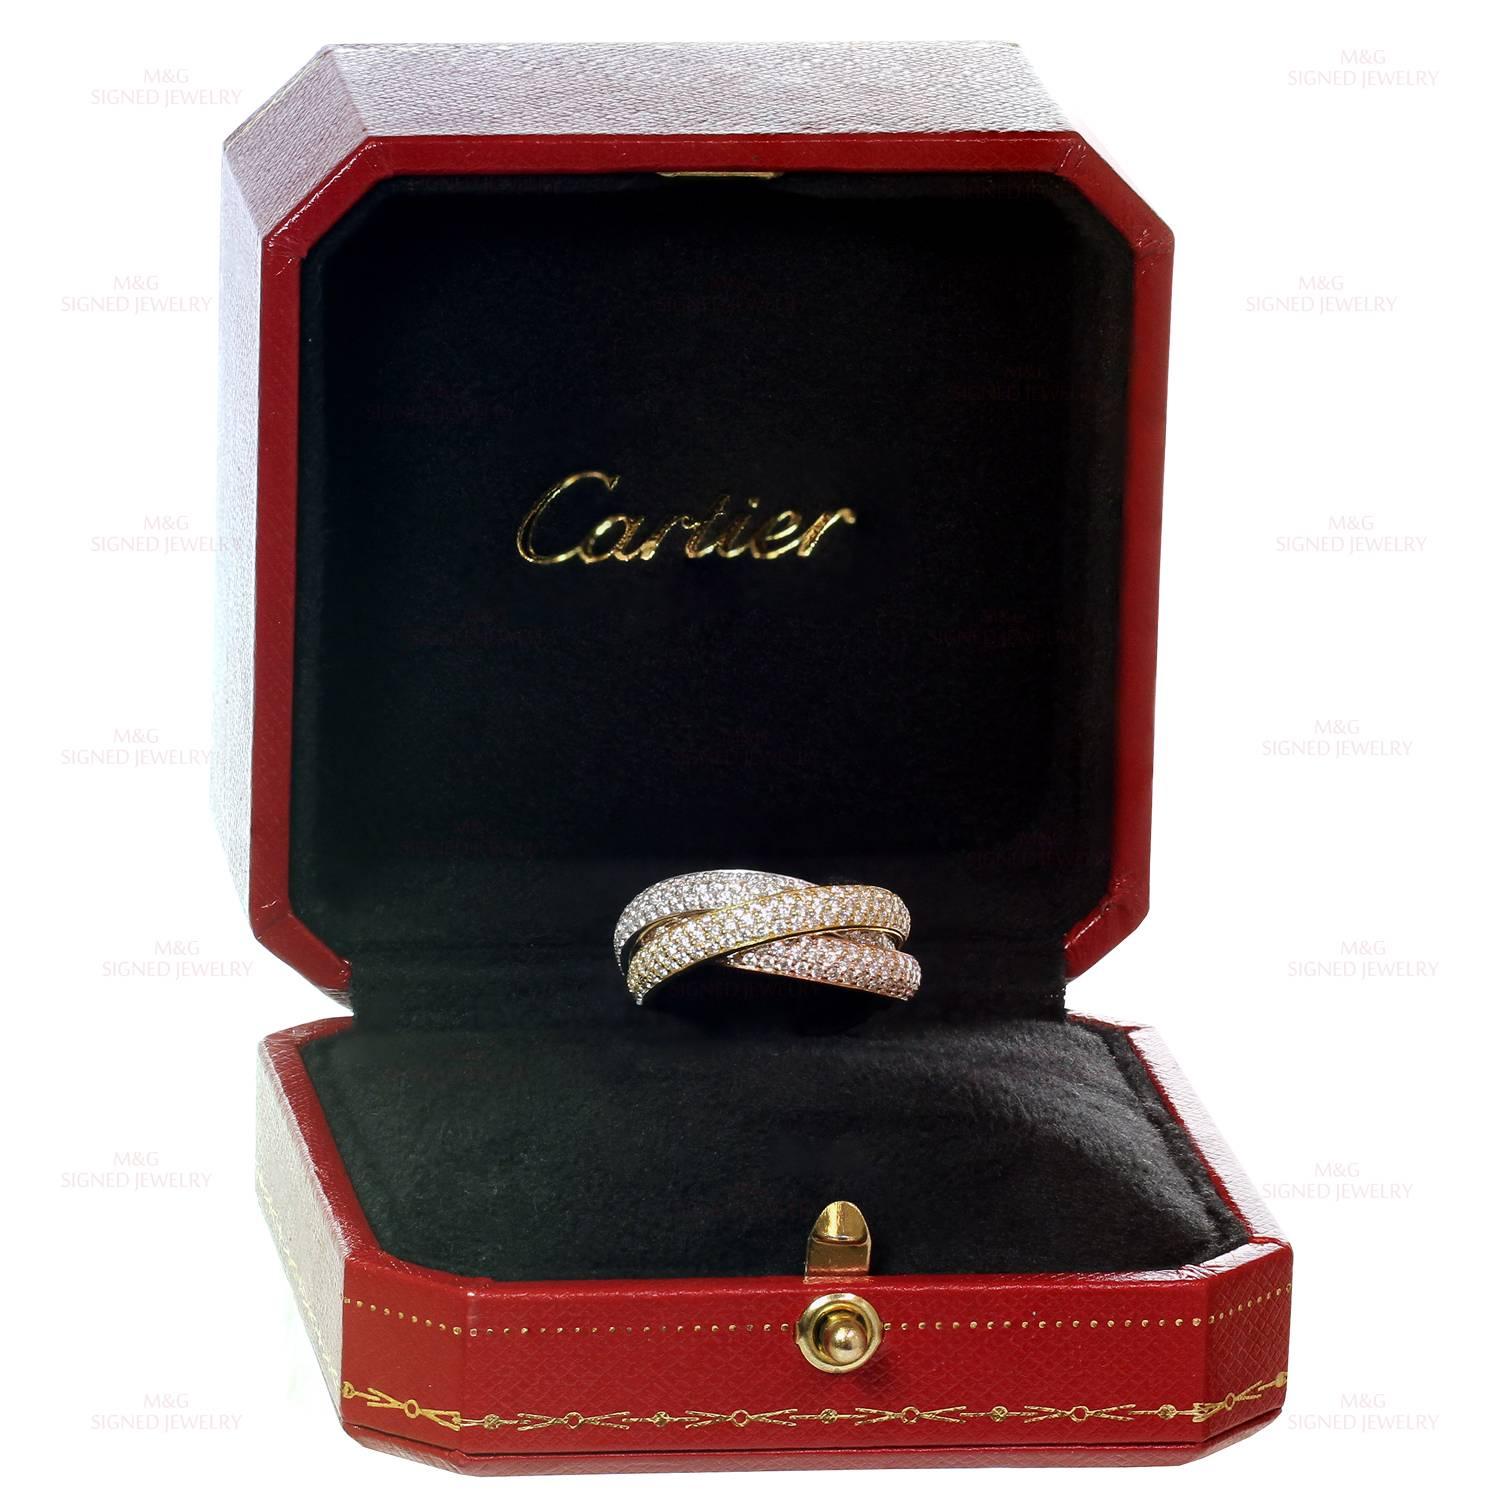 This iconic ring from Cartier's Trinity collection features 3 interconnected bands in 18k yellow, rose, and white gold, beautifully pave-set with sparkling brilliant-cut round diamonds of an estimated 3.0 carats. A classic and elegant design. Made